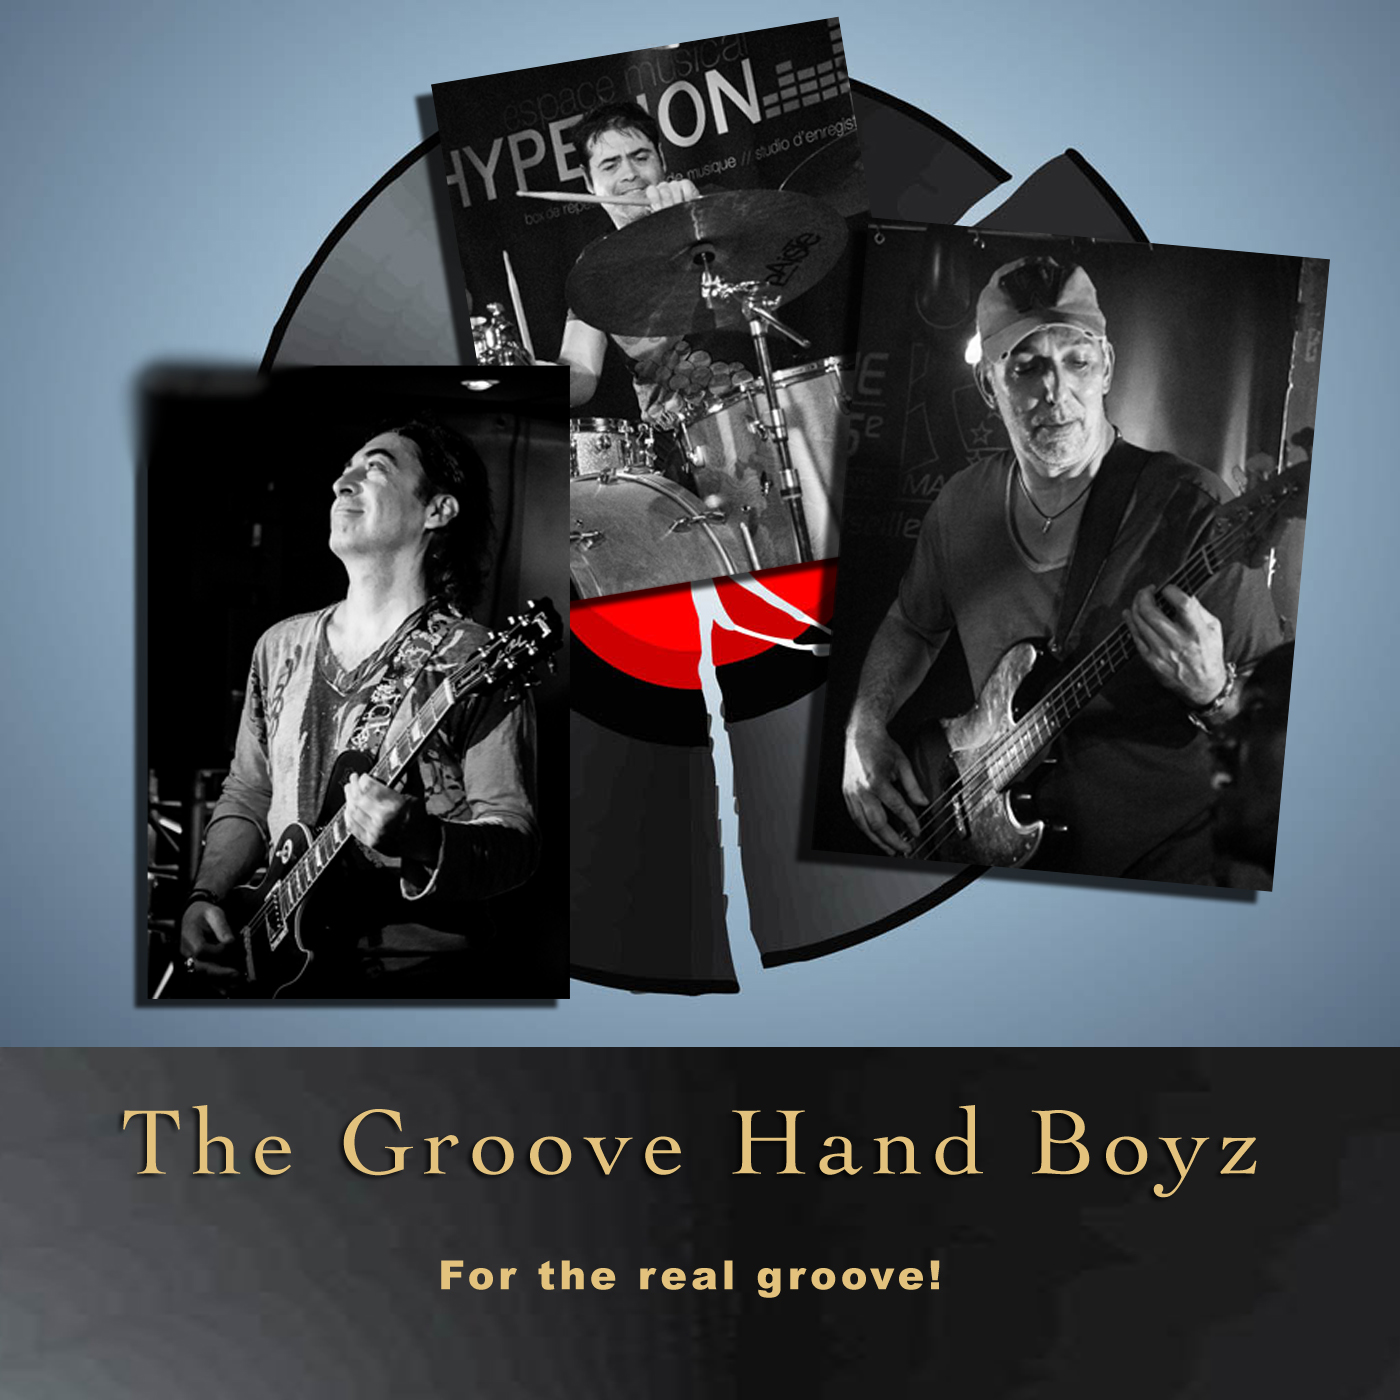 French wedding band The Groove Hand Boyz